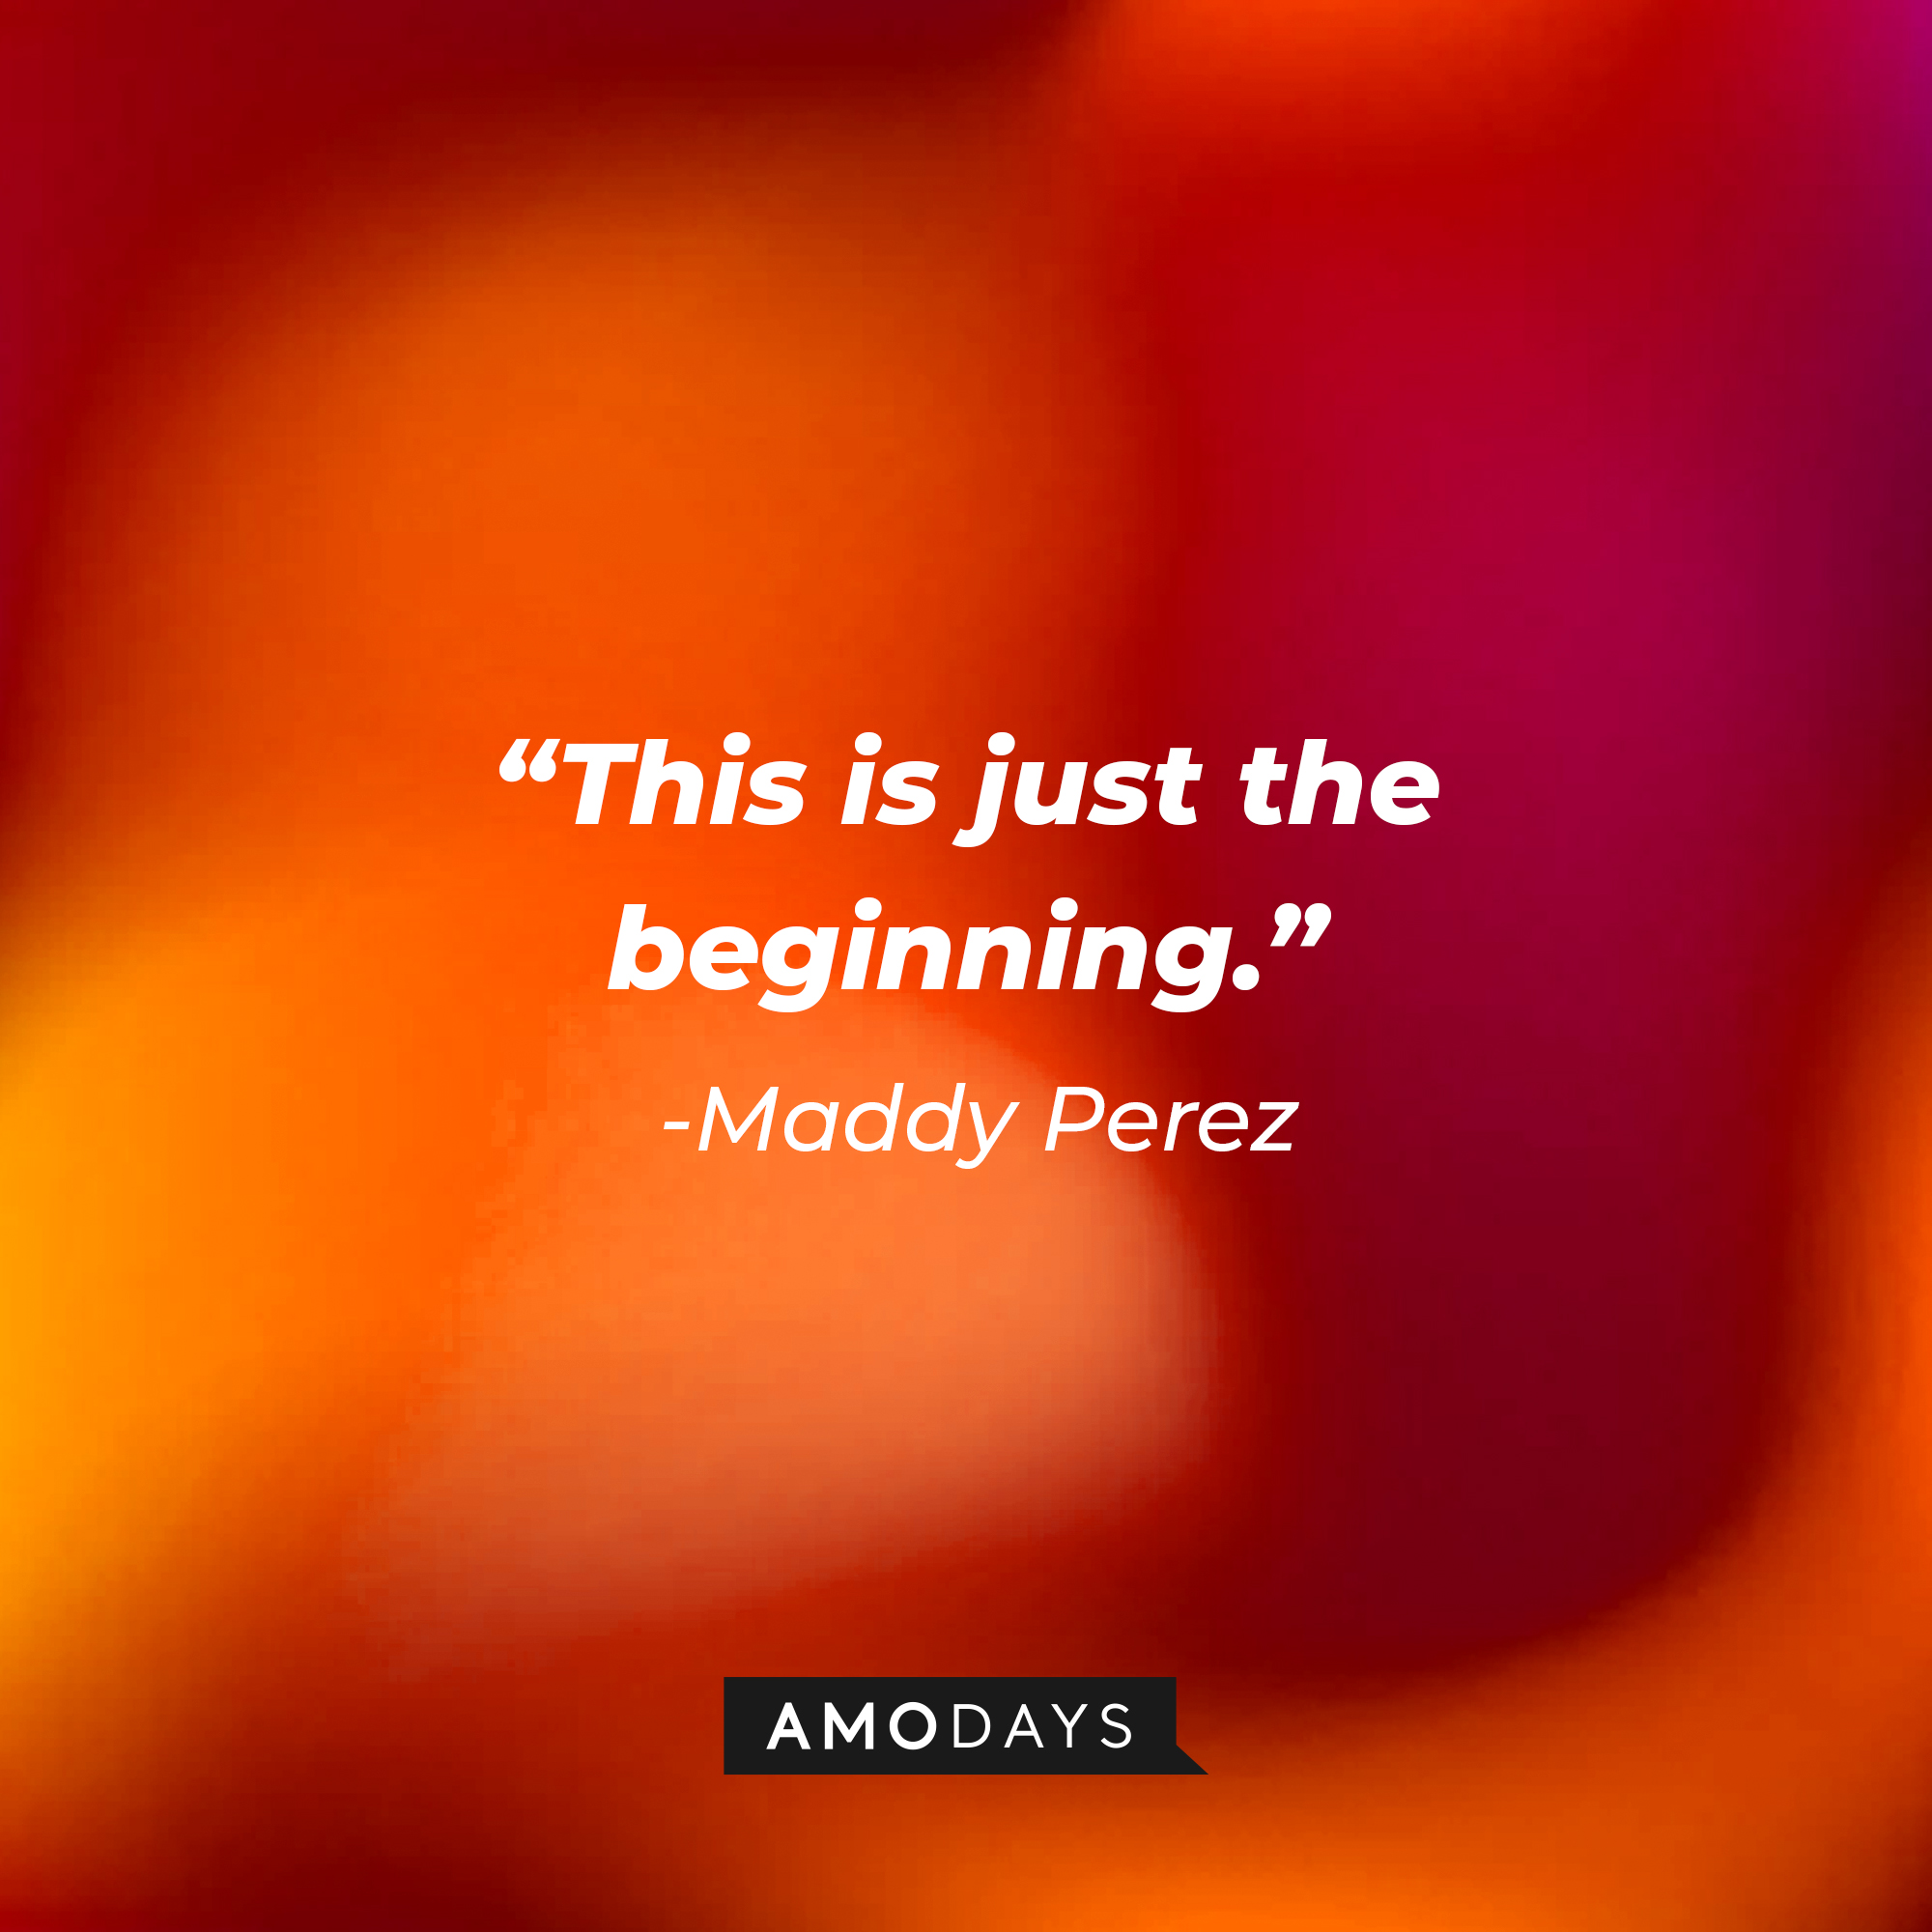 Maddy Perez’ quote: “This is just the beginning.” | Source: AmoDays